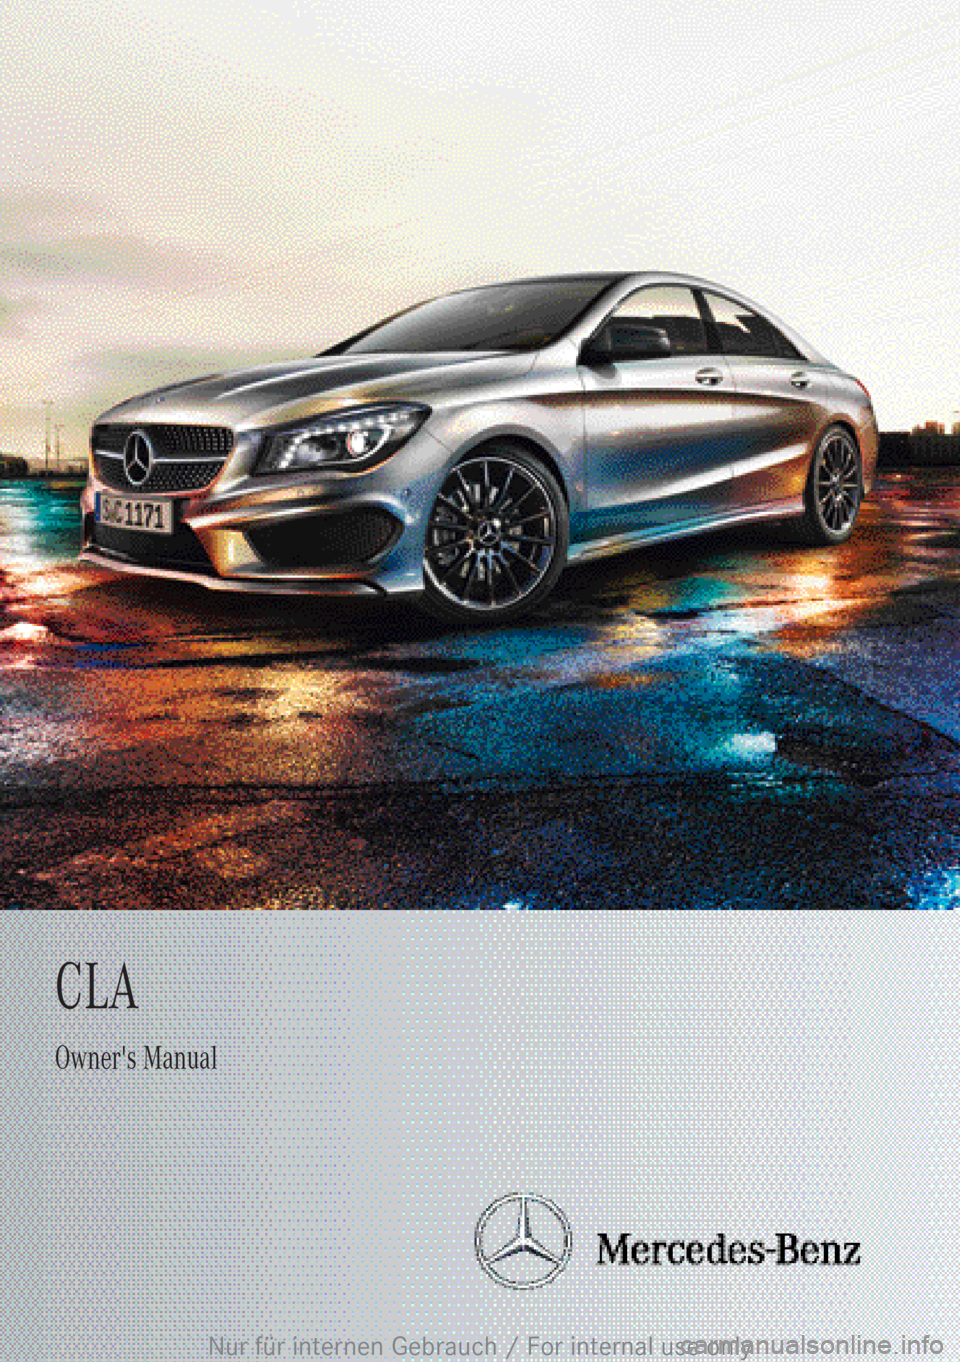 MERCEDES-BENZ CLA 2013  Owners Manual CLAOwner's Manual
Nur für internen Gebrauch / For internal use only 